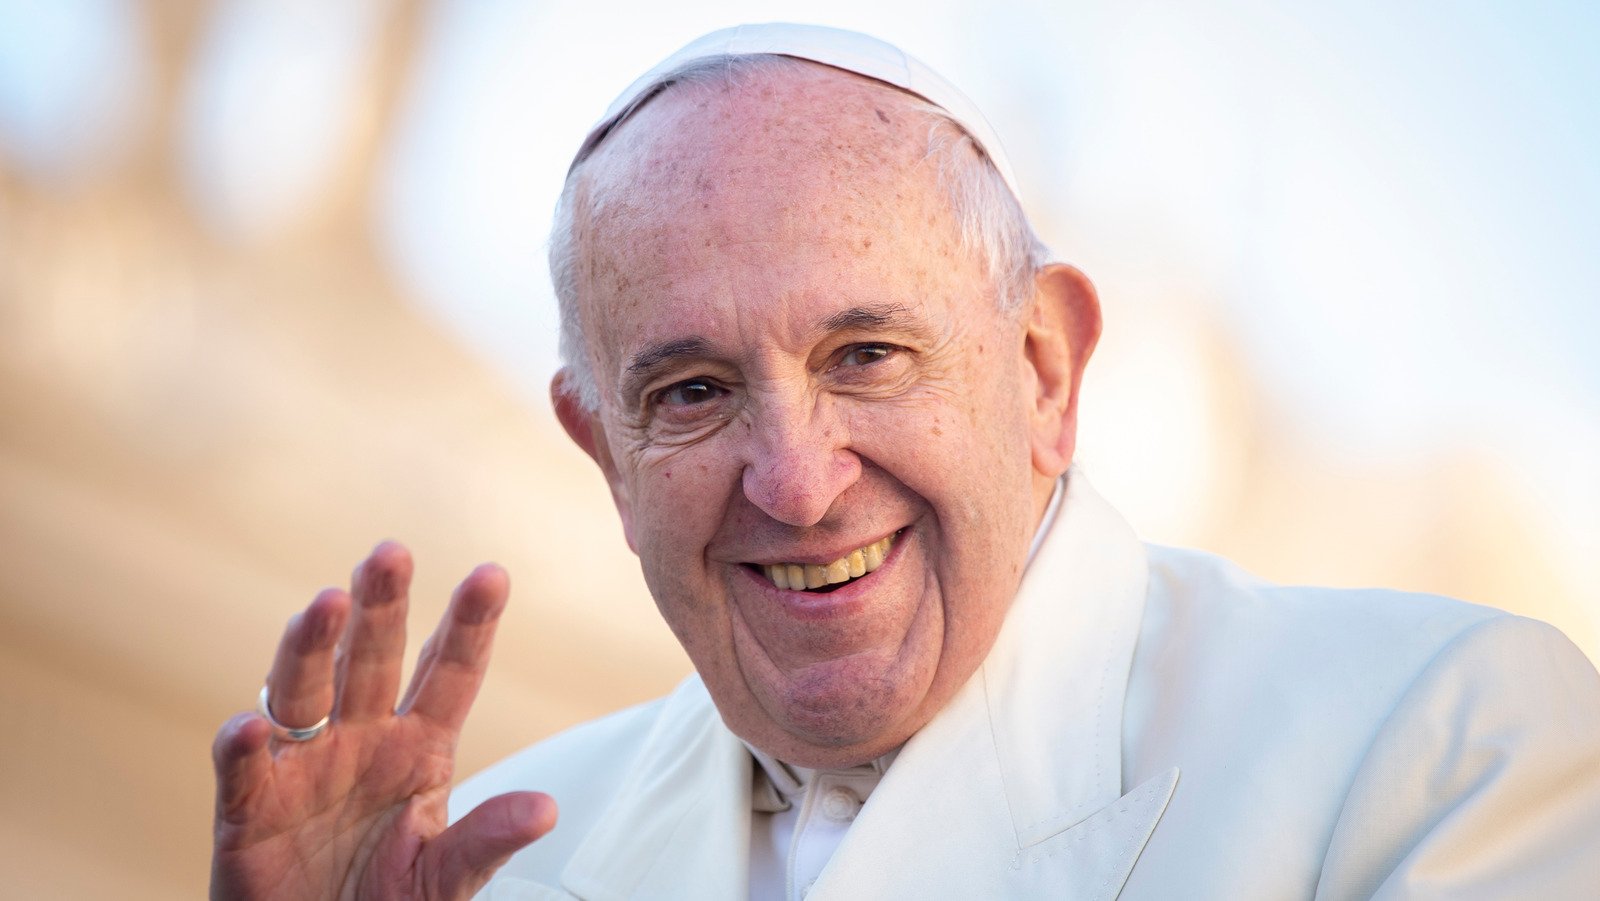 You'll Never See The Pope With A Beard. Here's Why - Grunge